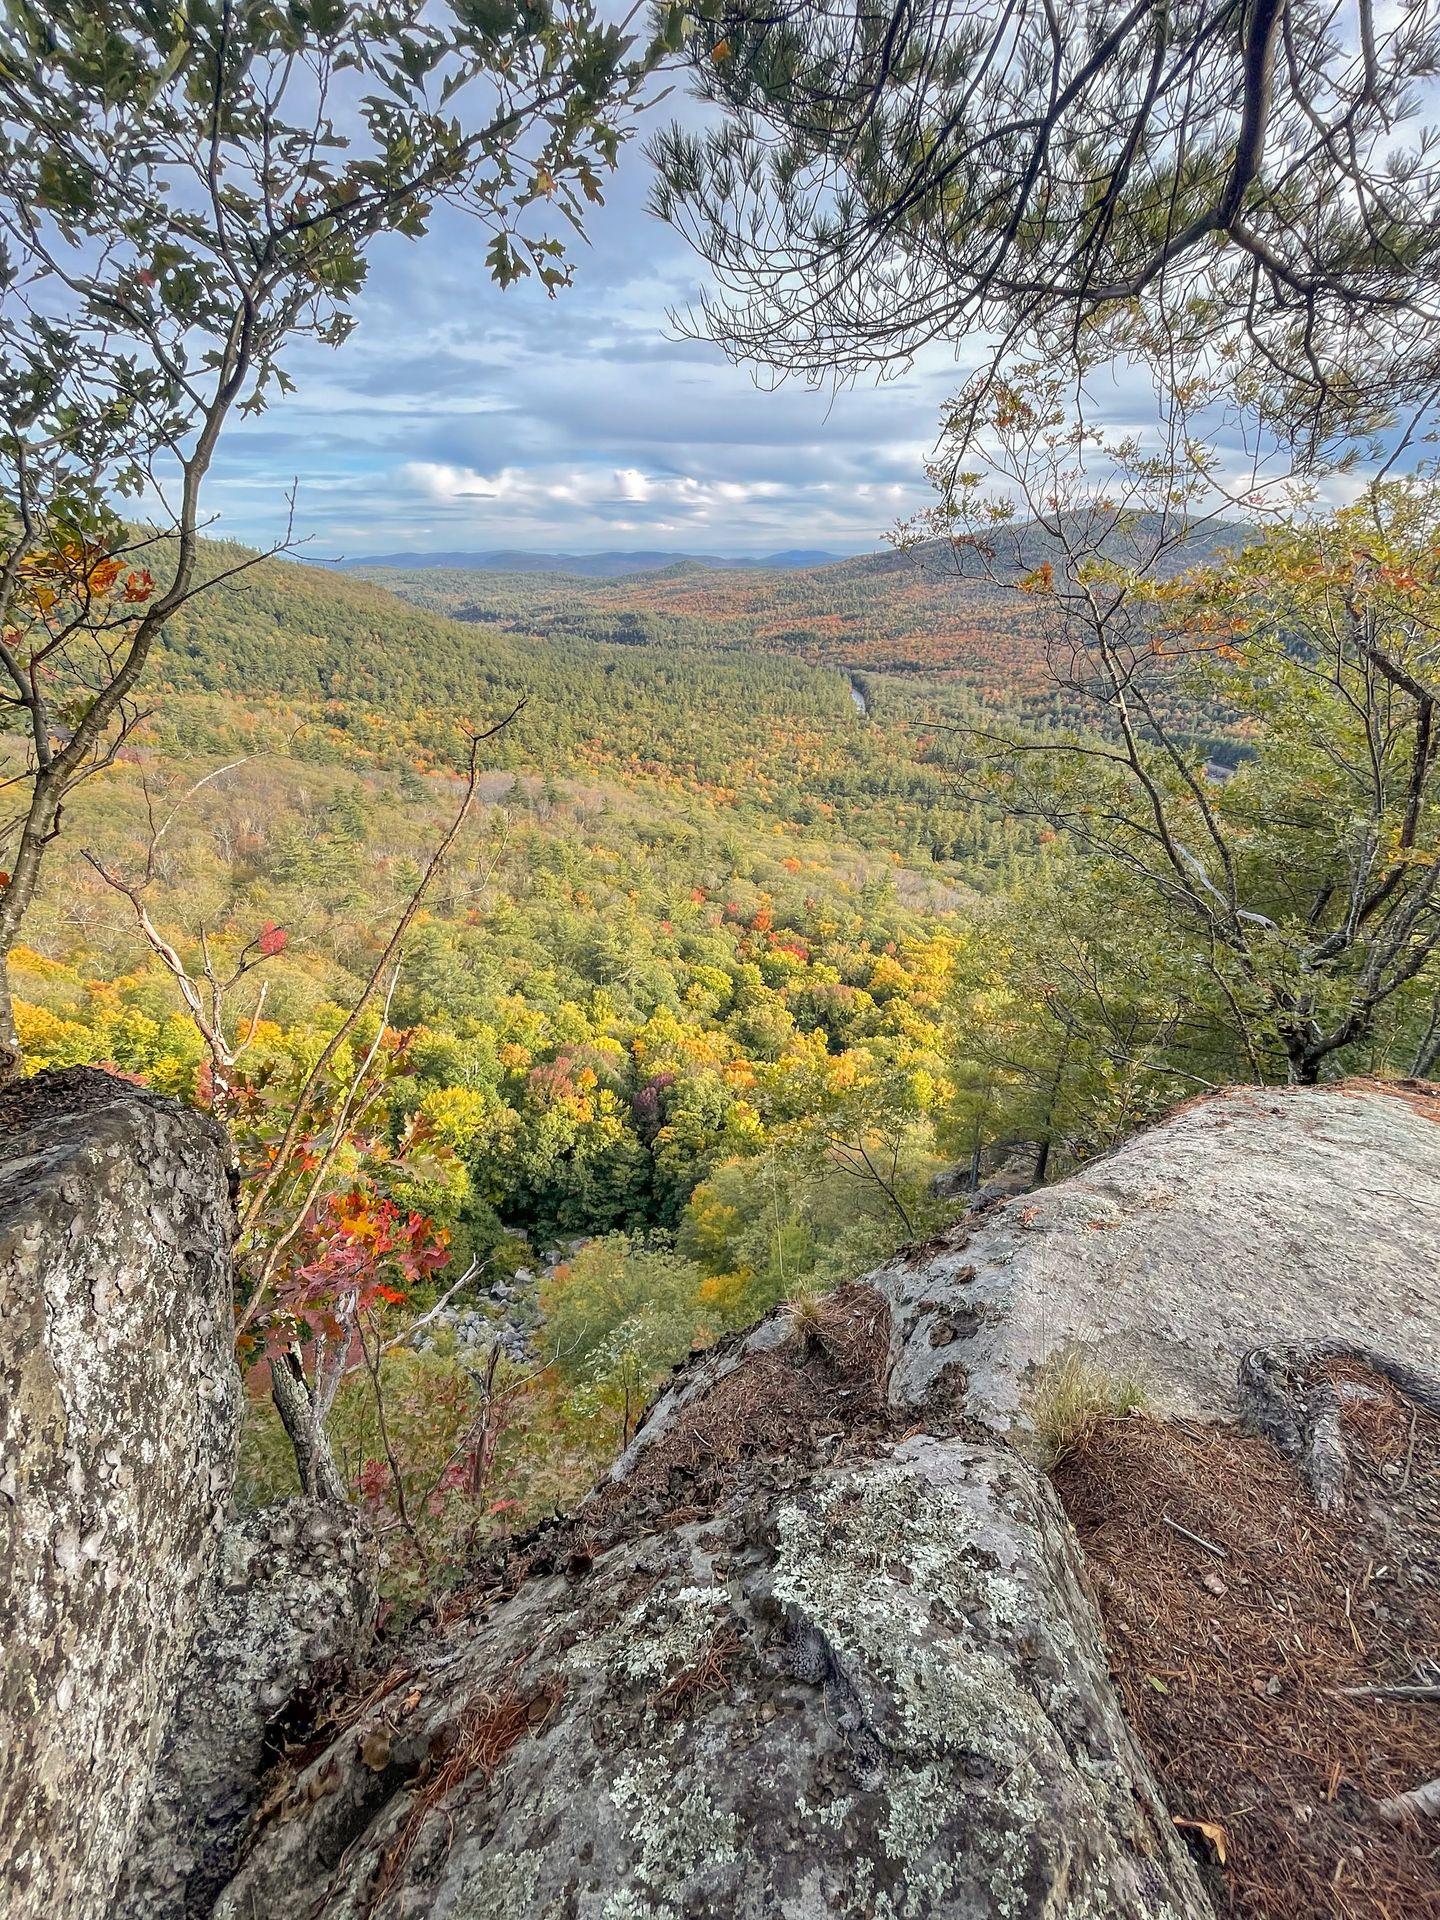 Looking through rocks and trees at a view of hills. There is some fall foliage in the distance.